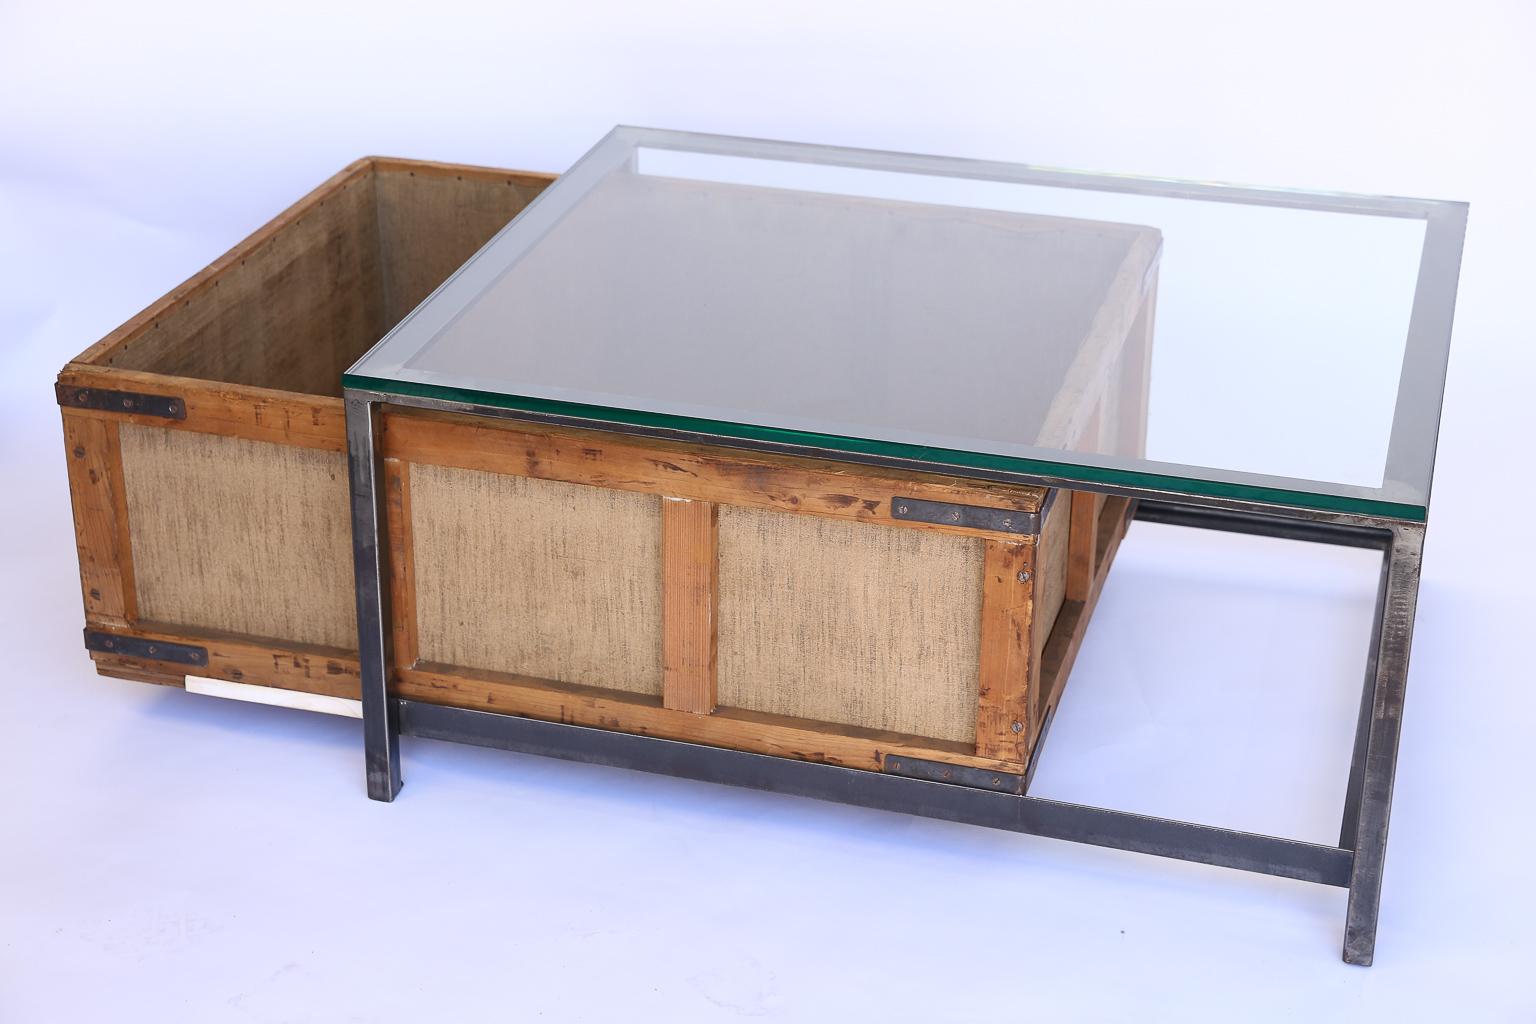 This is a custom coffee table made from a vintage German cigar storage bin. The bin was used to store cigars which were hand rolled in a German cigar factory. The table features new glass and iron which form the coffee table. The cigar bin adds